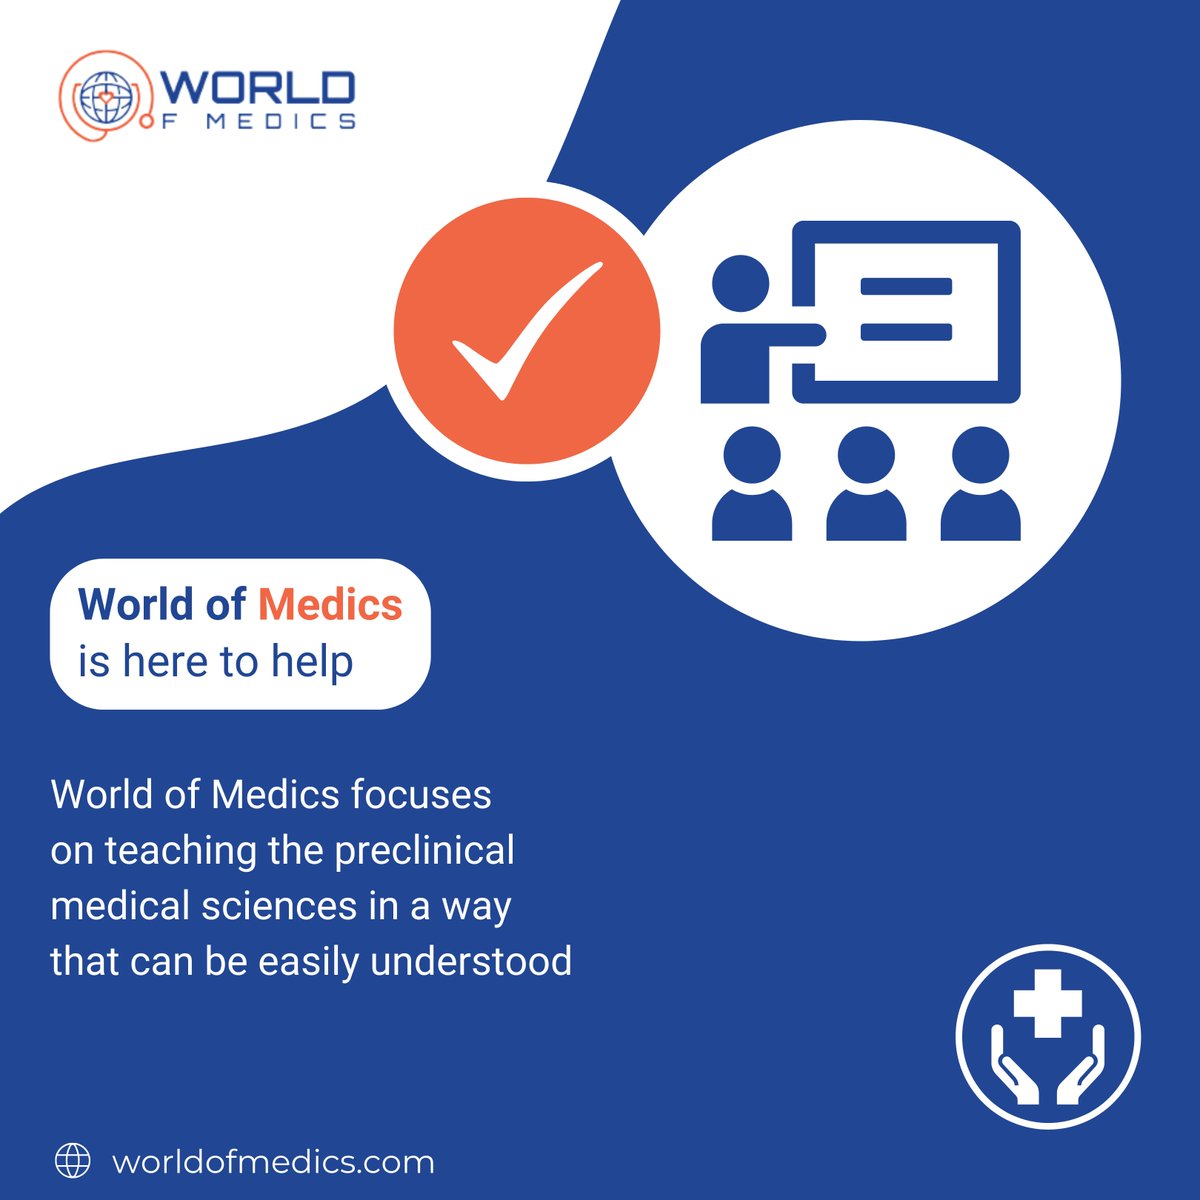 World of Medics is here to help you in your clinical studies and understanding of the preclinical medical sciences. 

#WorldofMedics #MedicalTutorials #HumanBody #Doctor #Medic #Nurse #MedicalStudent #MBChB #MD